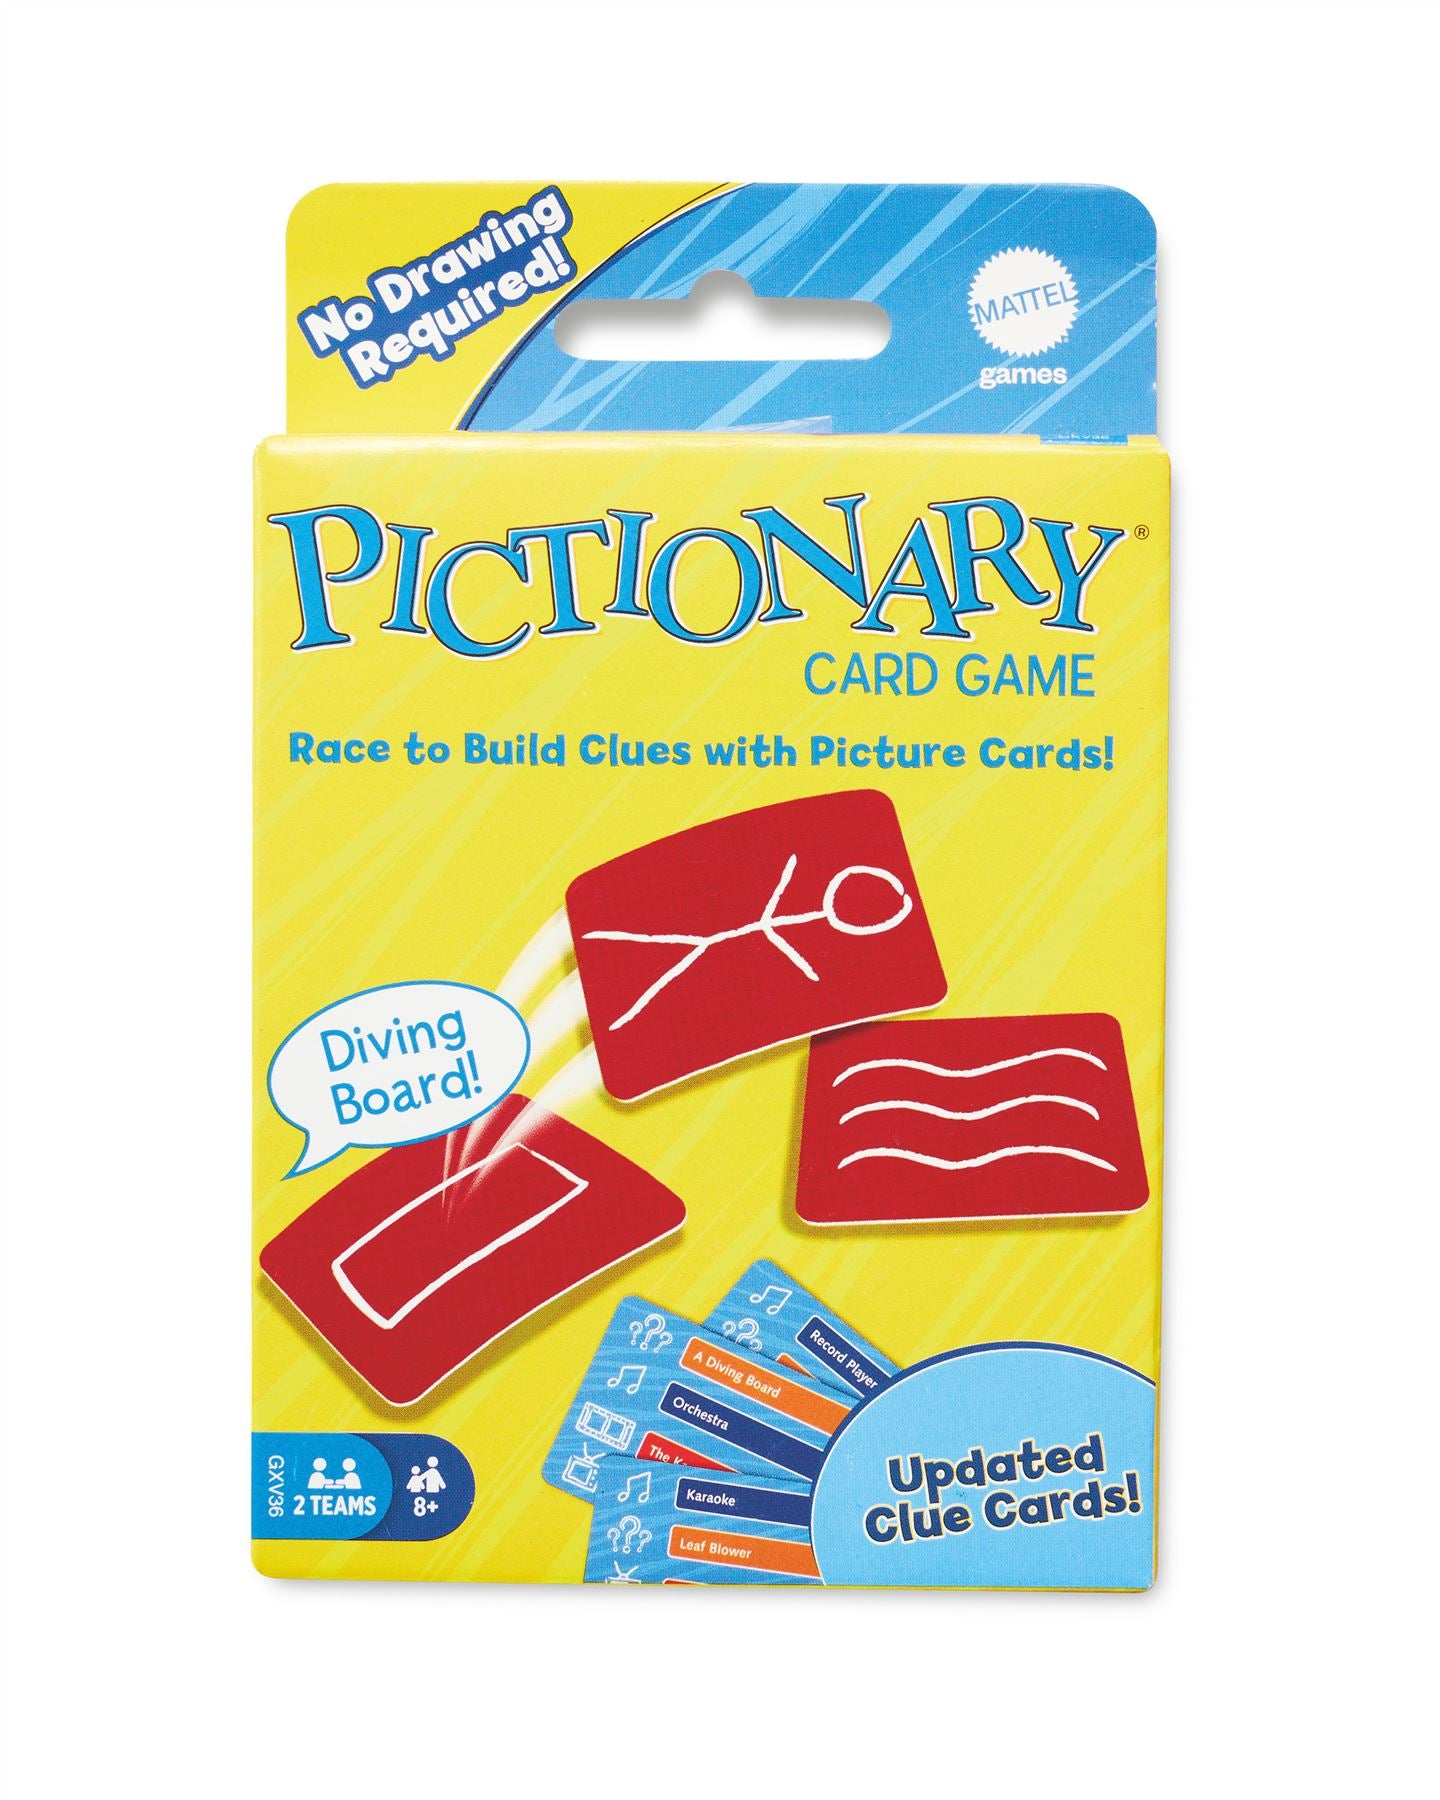 Pictionary Card Game GXV36 Family Fun Devinettes